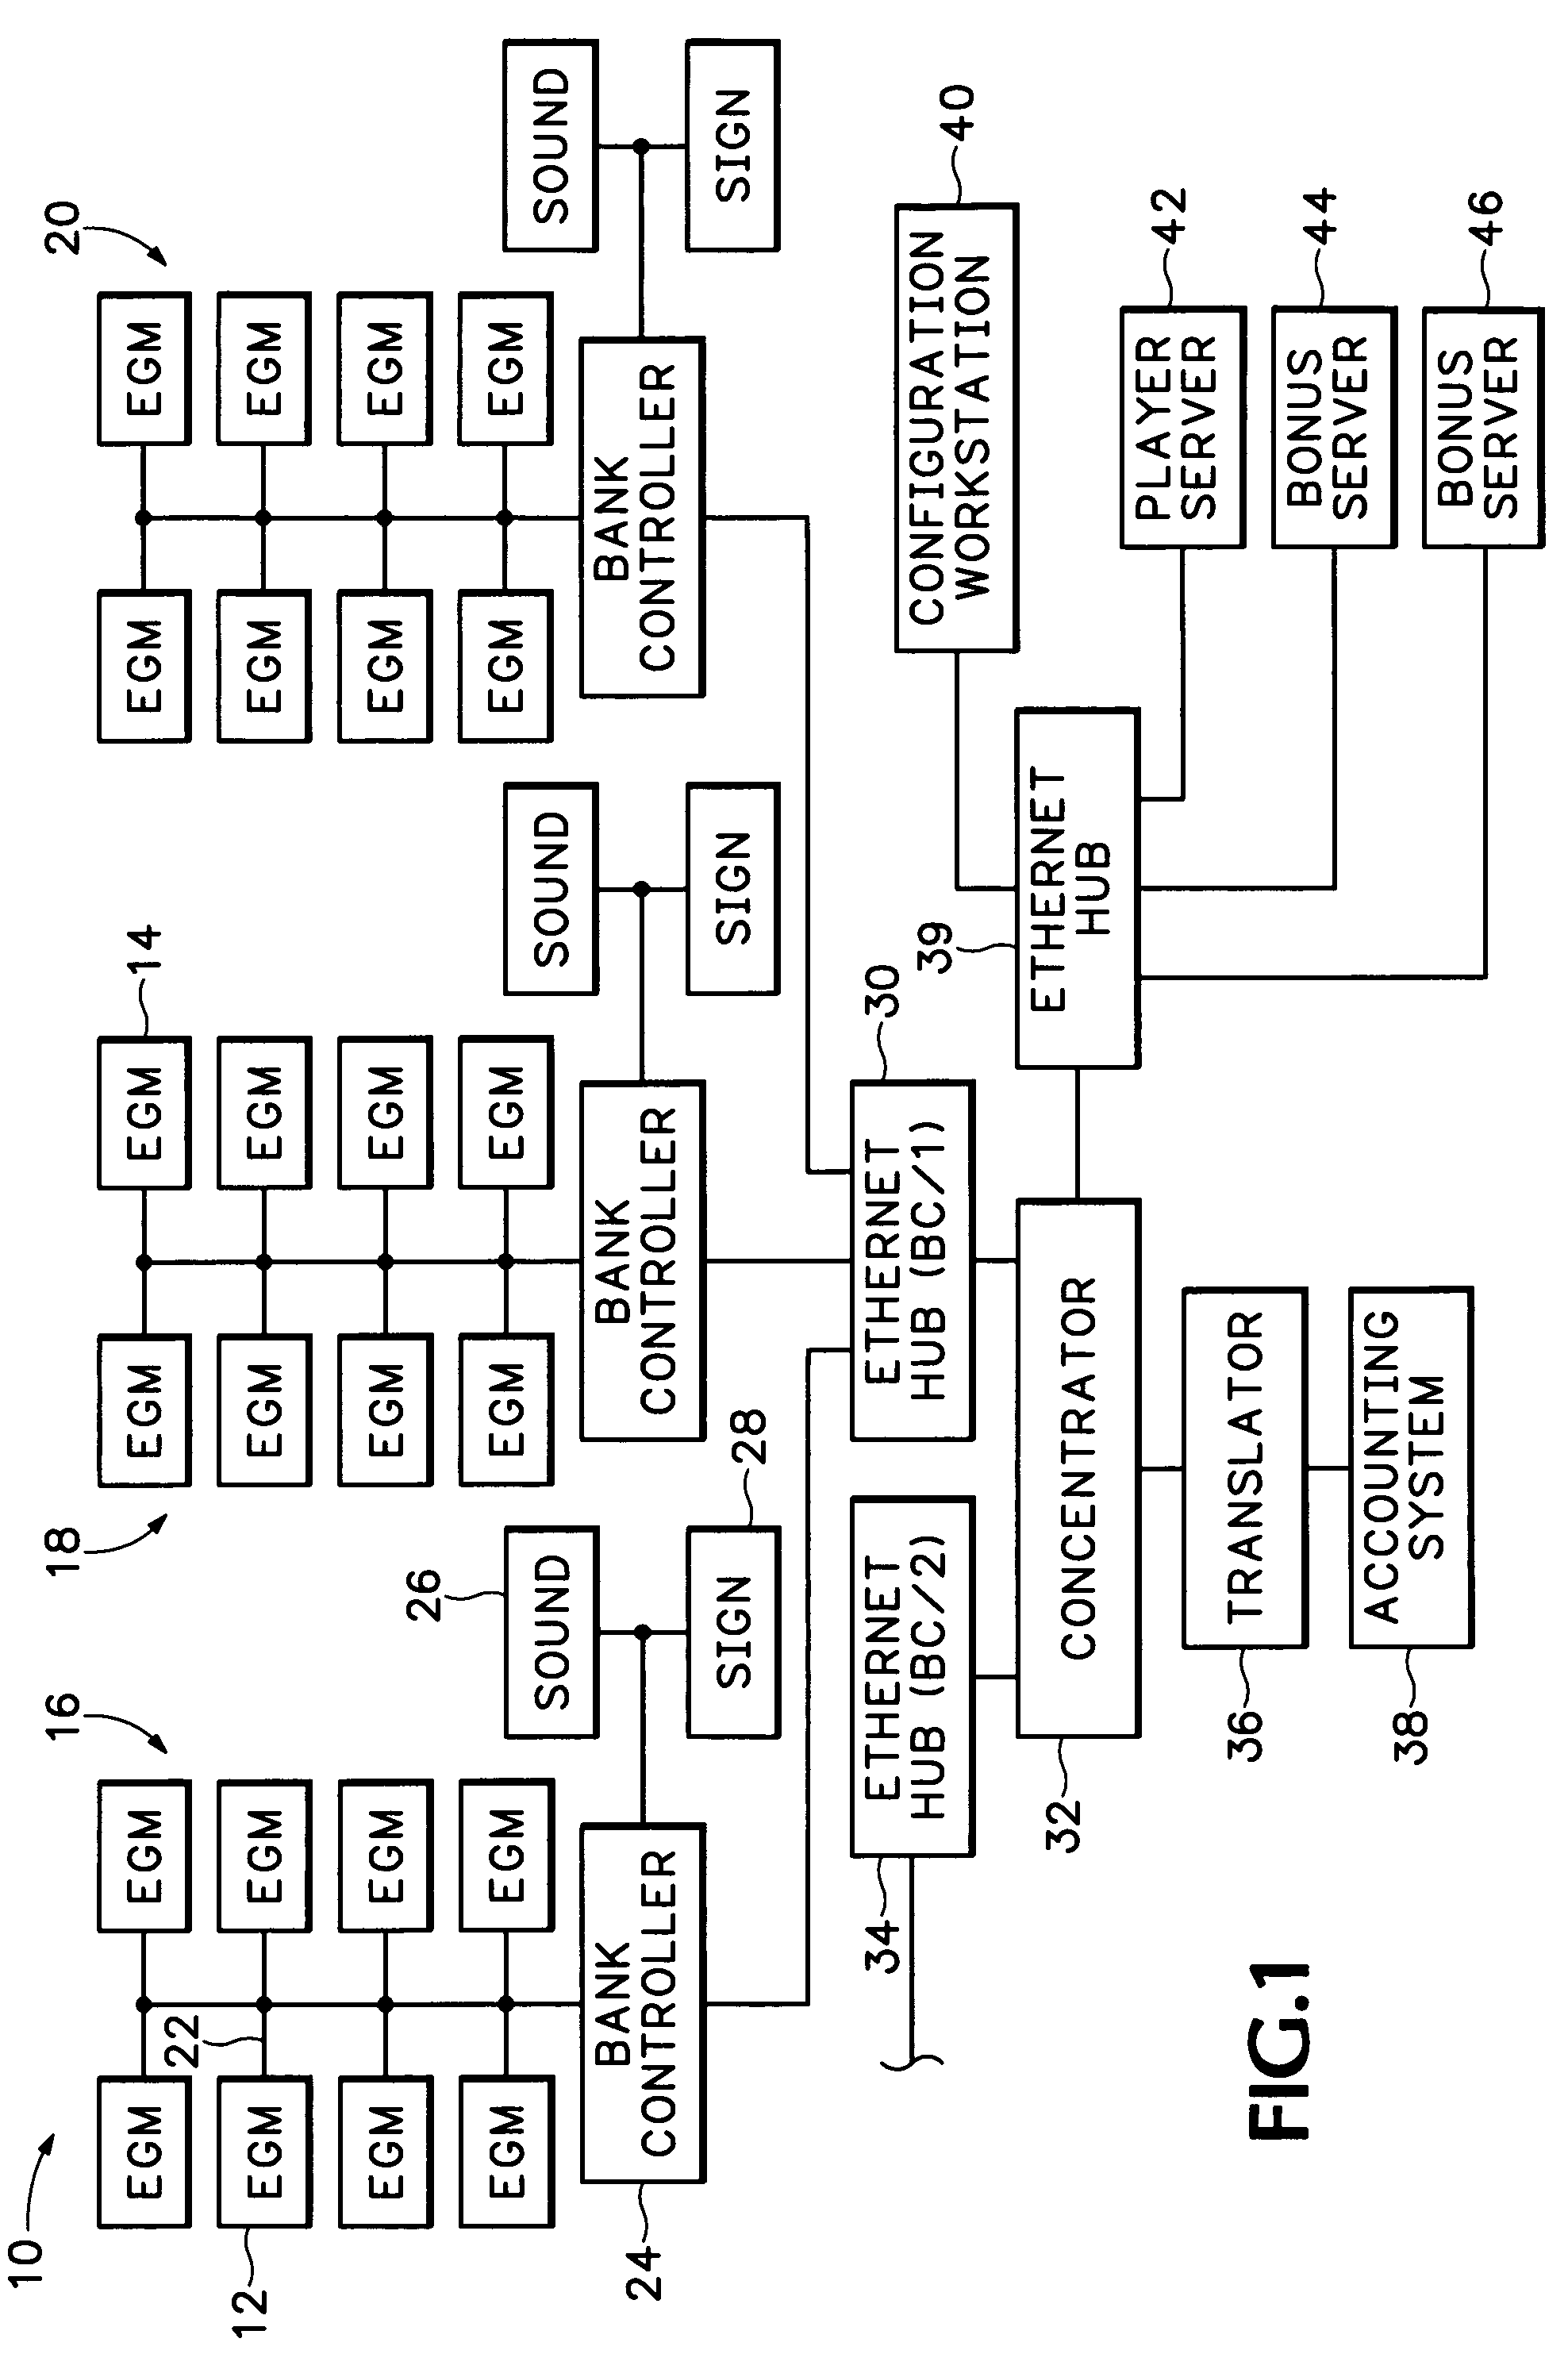 Method and apparatus for awarding a bonus on a network of electronic gaming devices during a pre-determined time period